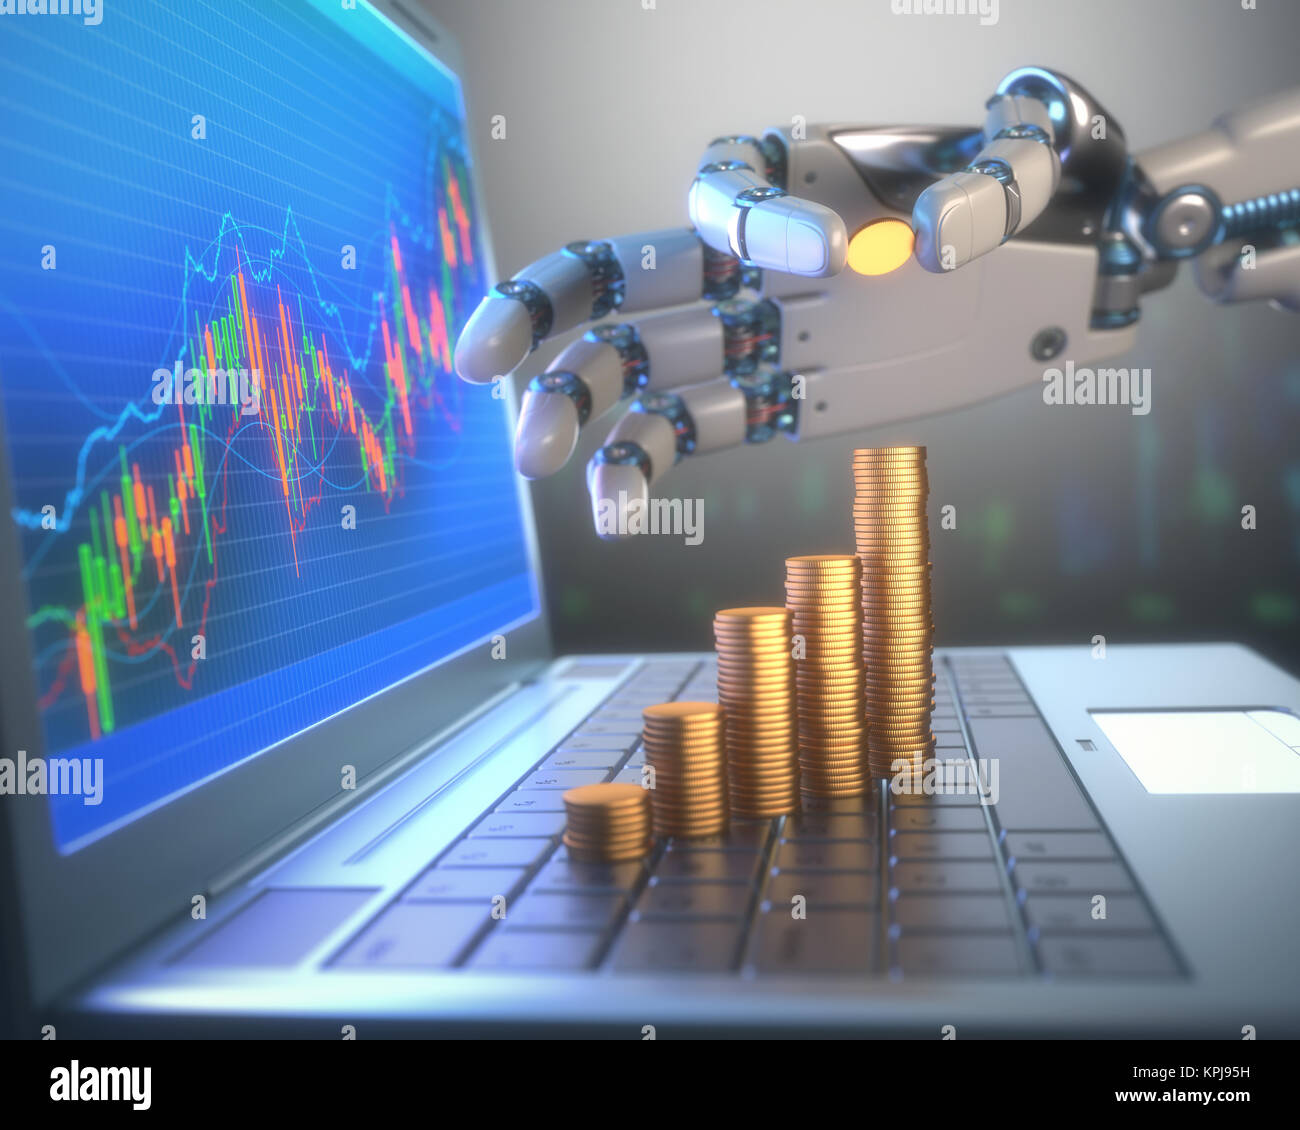 Robot Trading System On The Stock Market Stock Photo